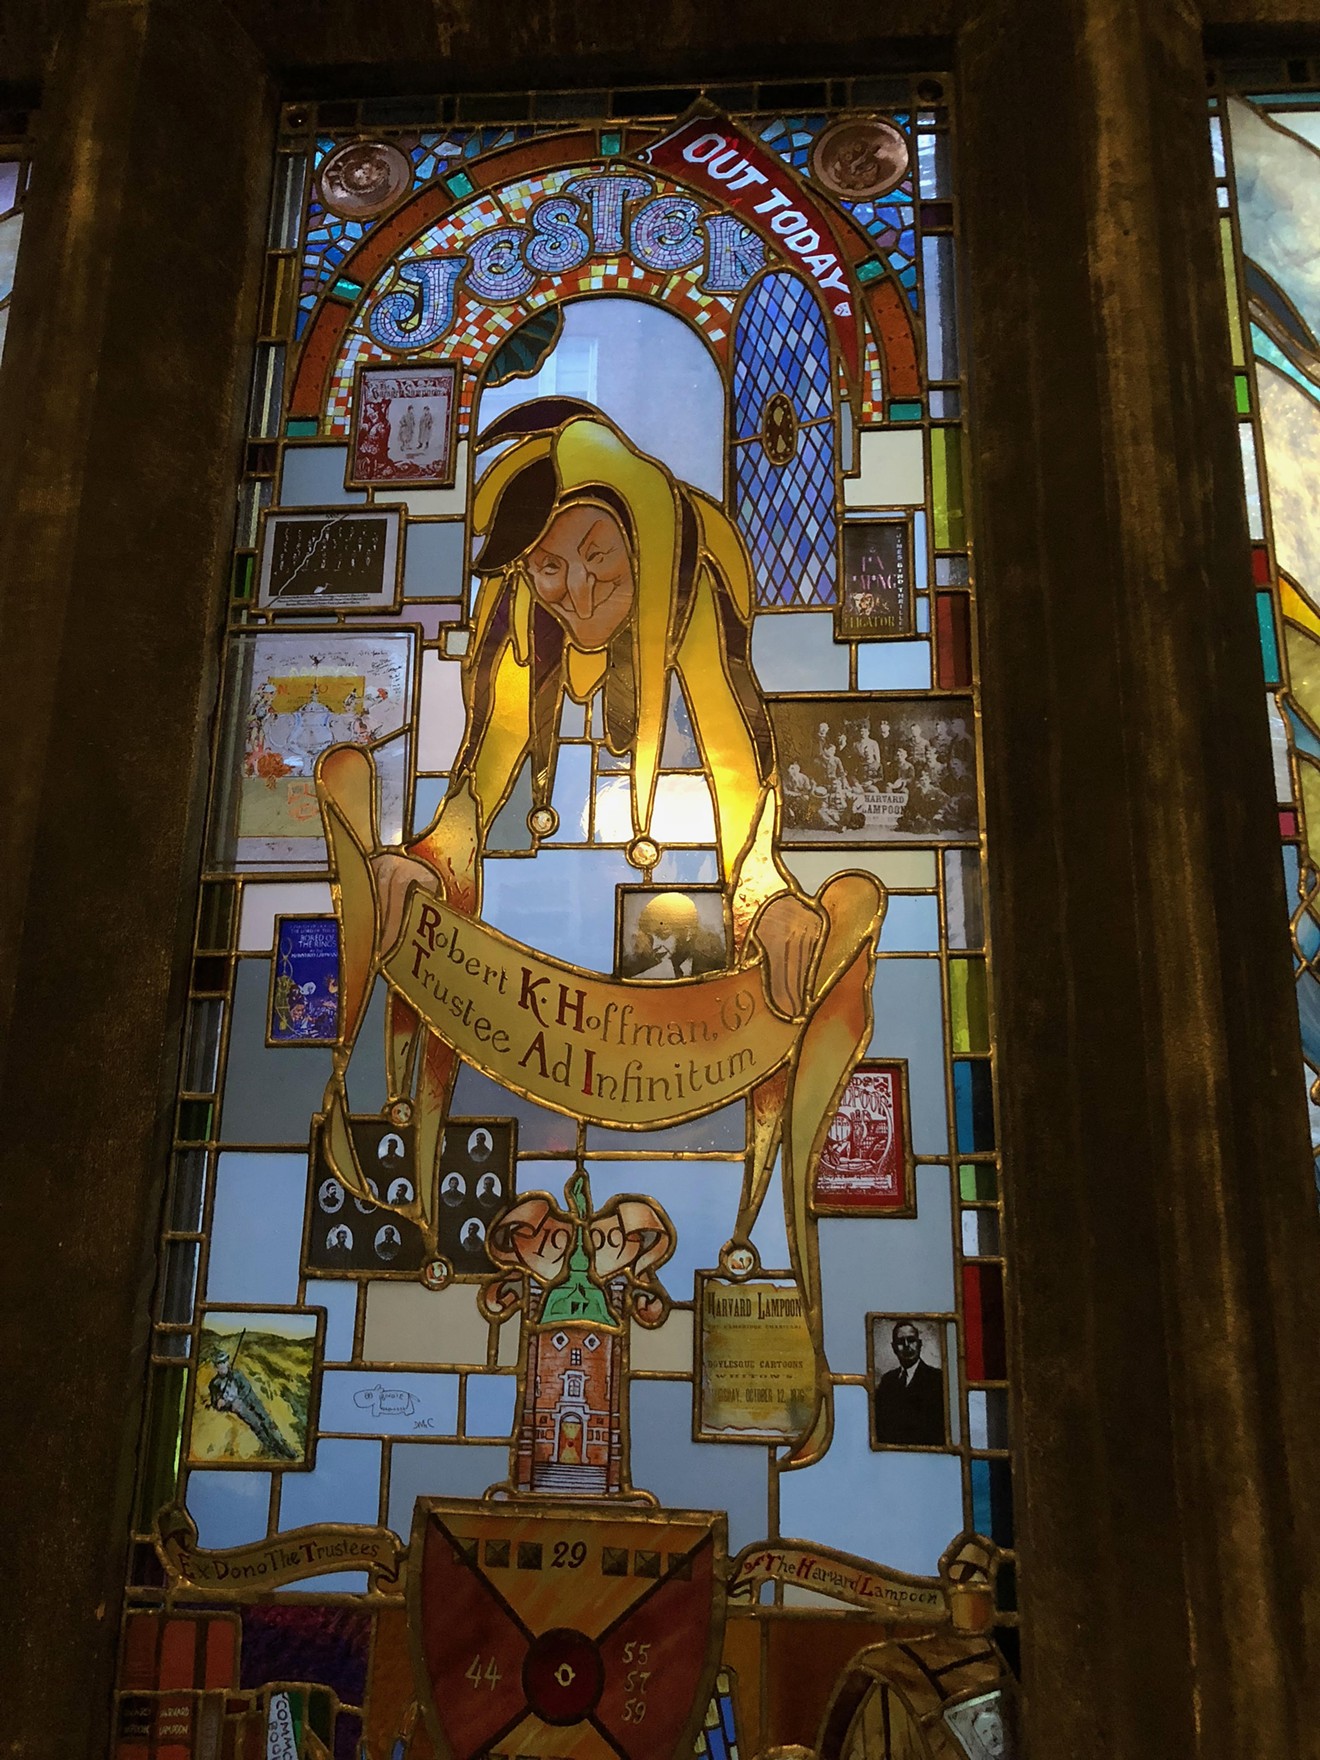 A stained-glass window in the Lampoon Castle, the headquarters of Harvard University's student humor magazine, features a likeness of Robert K. Hoffman.